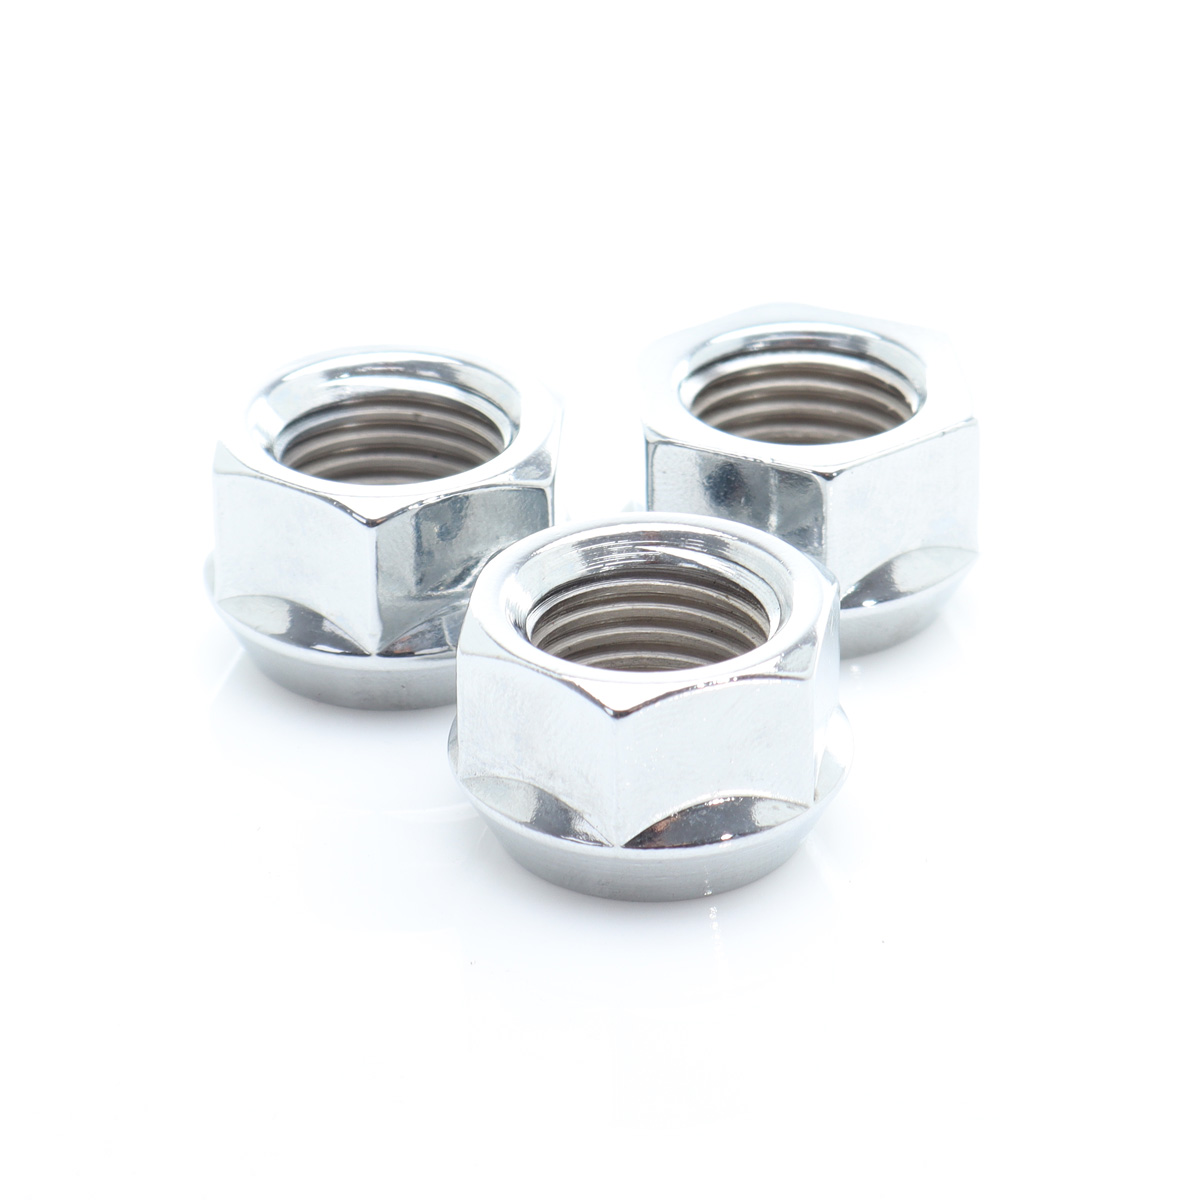 Spare adapter mounting lug nut 12x1,25